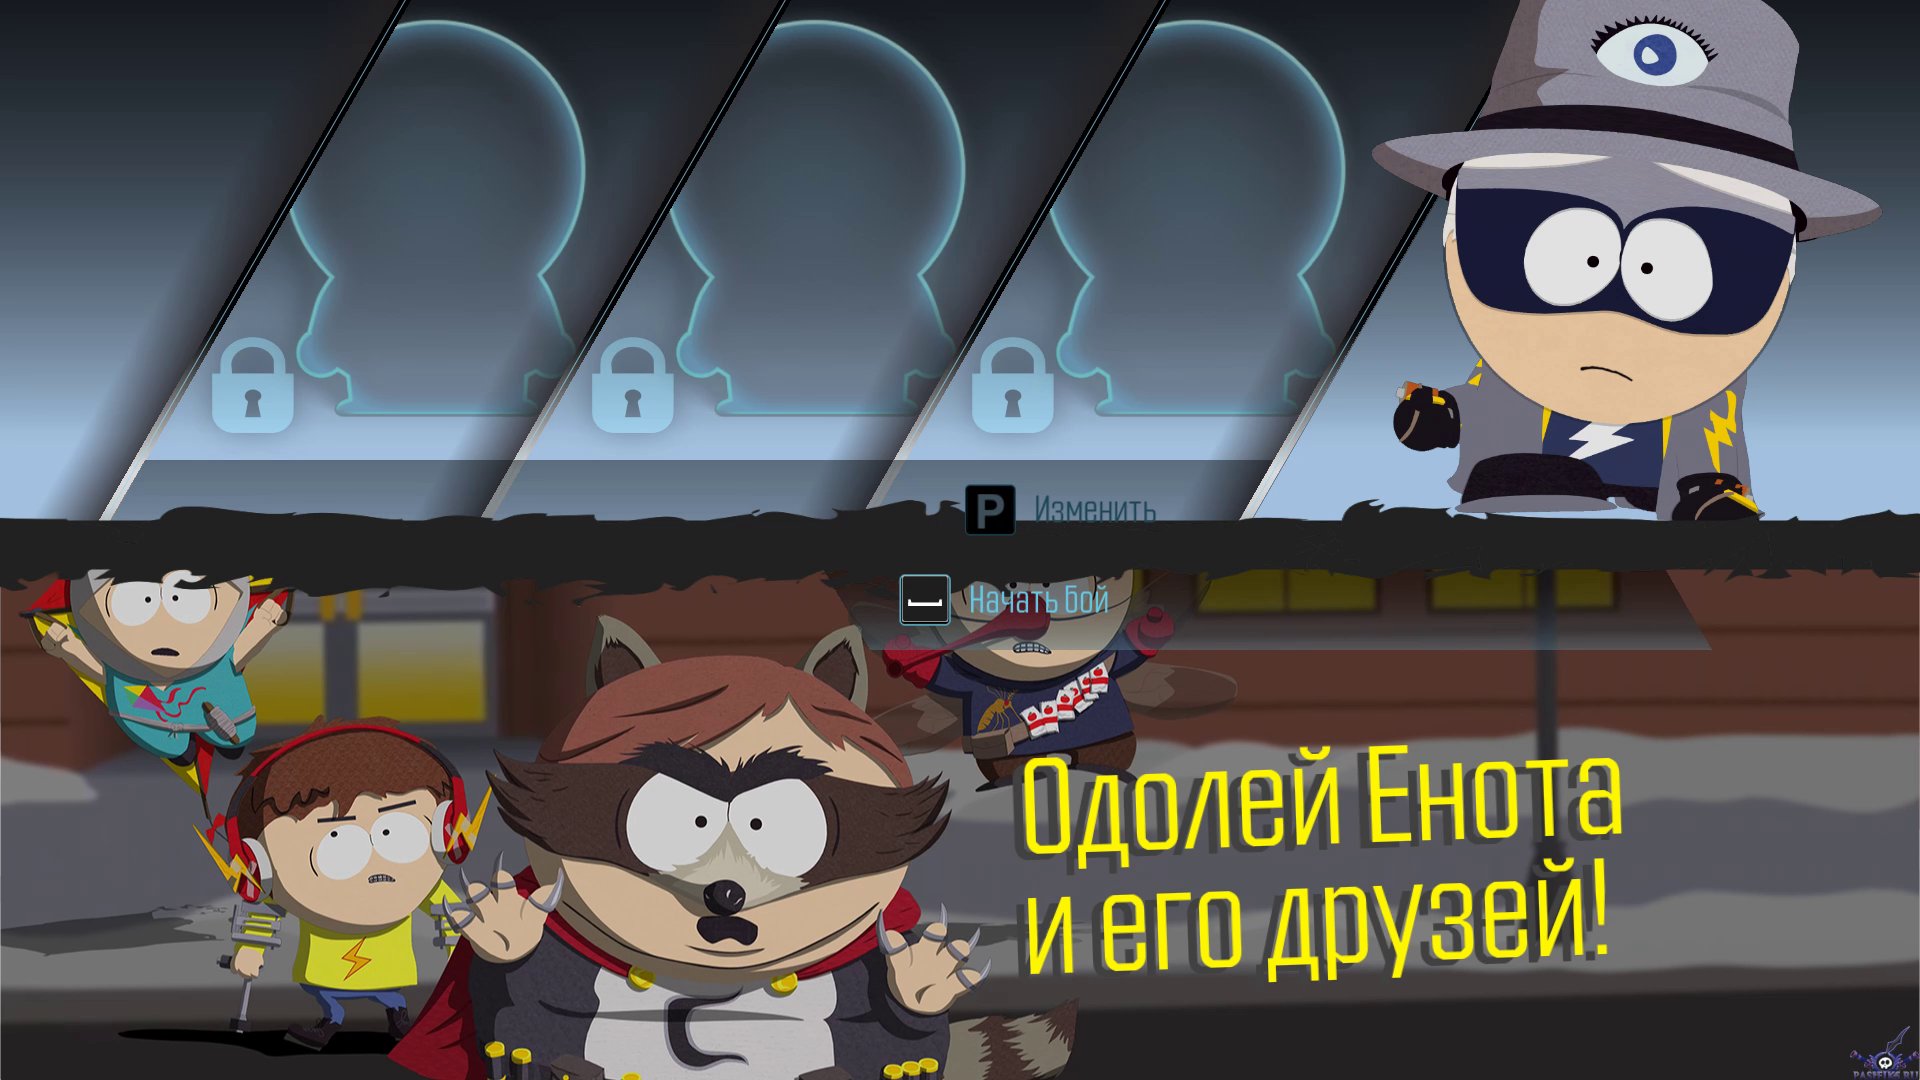 South park the fractured but whole купить ключ steam дешево фото 35